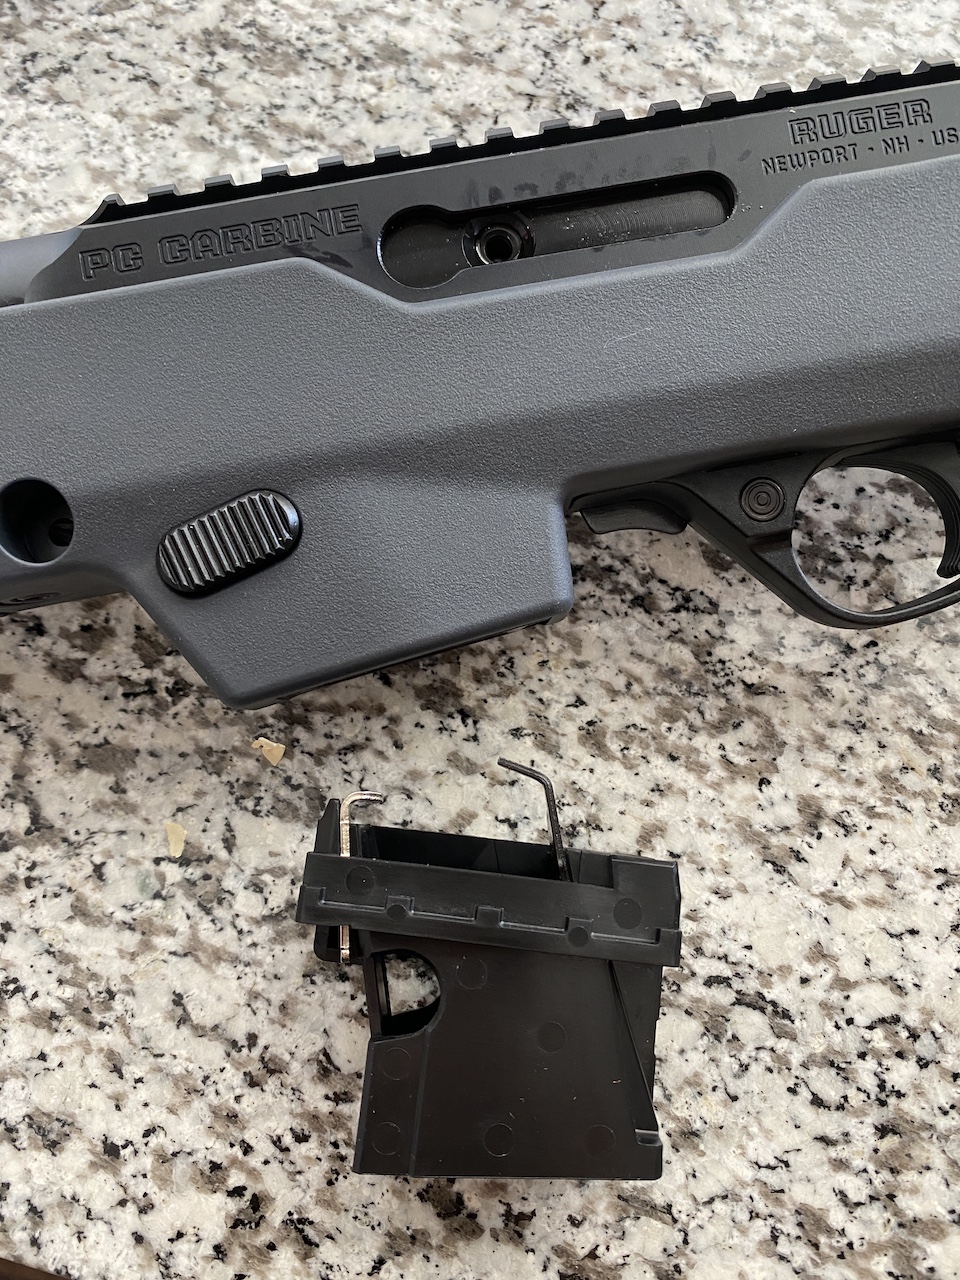 Ruger PC Carbine comes with two magwells, a Ruger and a Glock